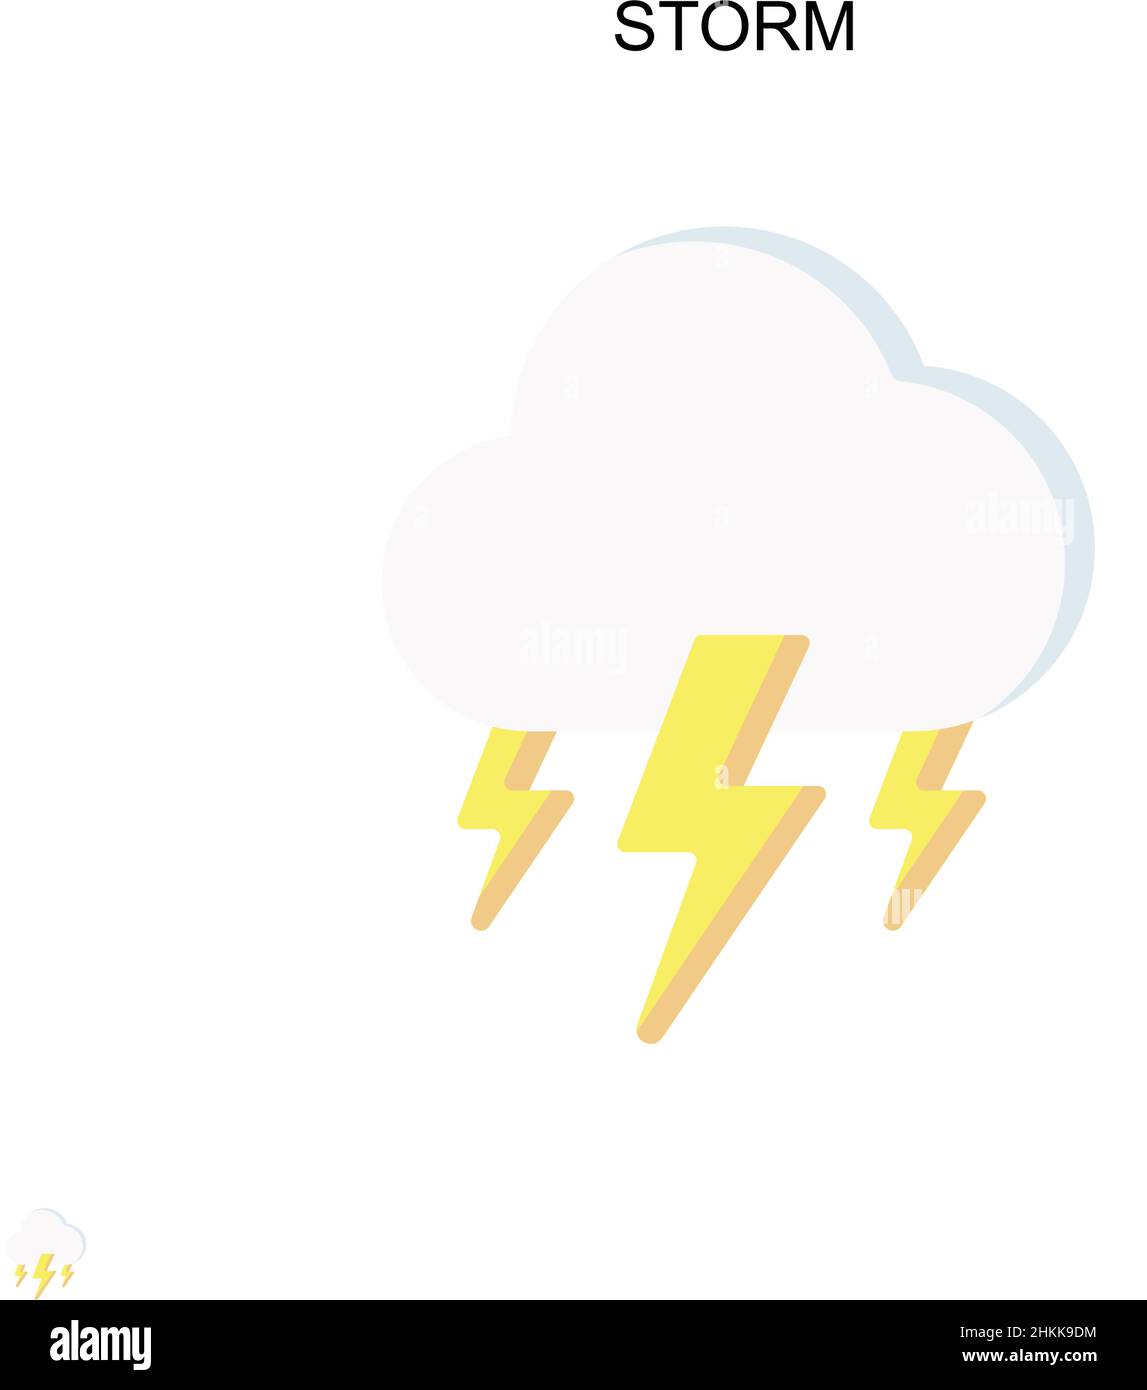 Storm Simple vector icon. Illustration symbol design template for web mobile UI element. Stock Vector